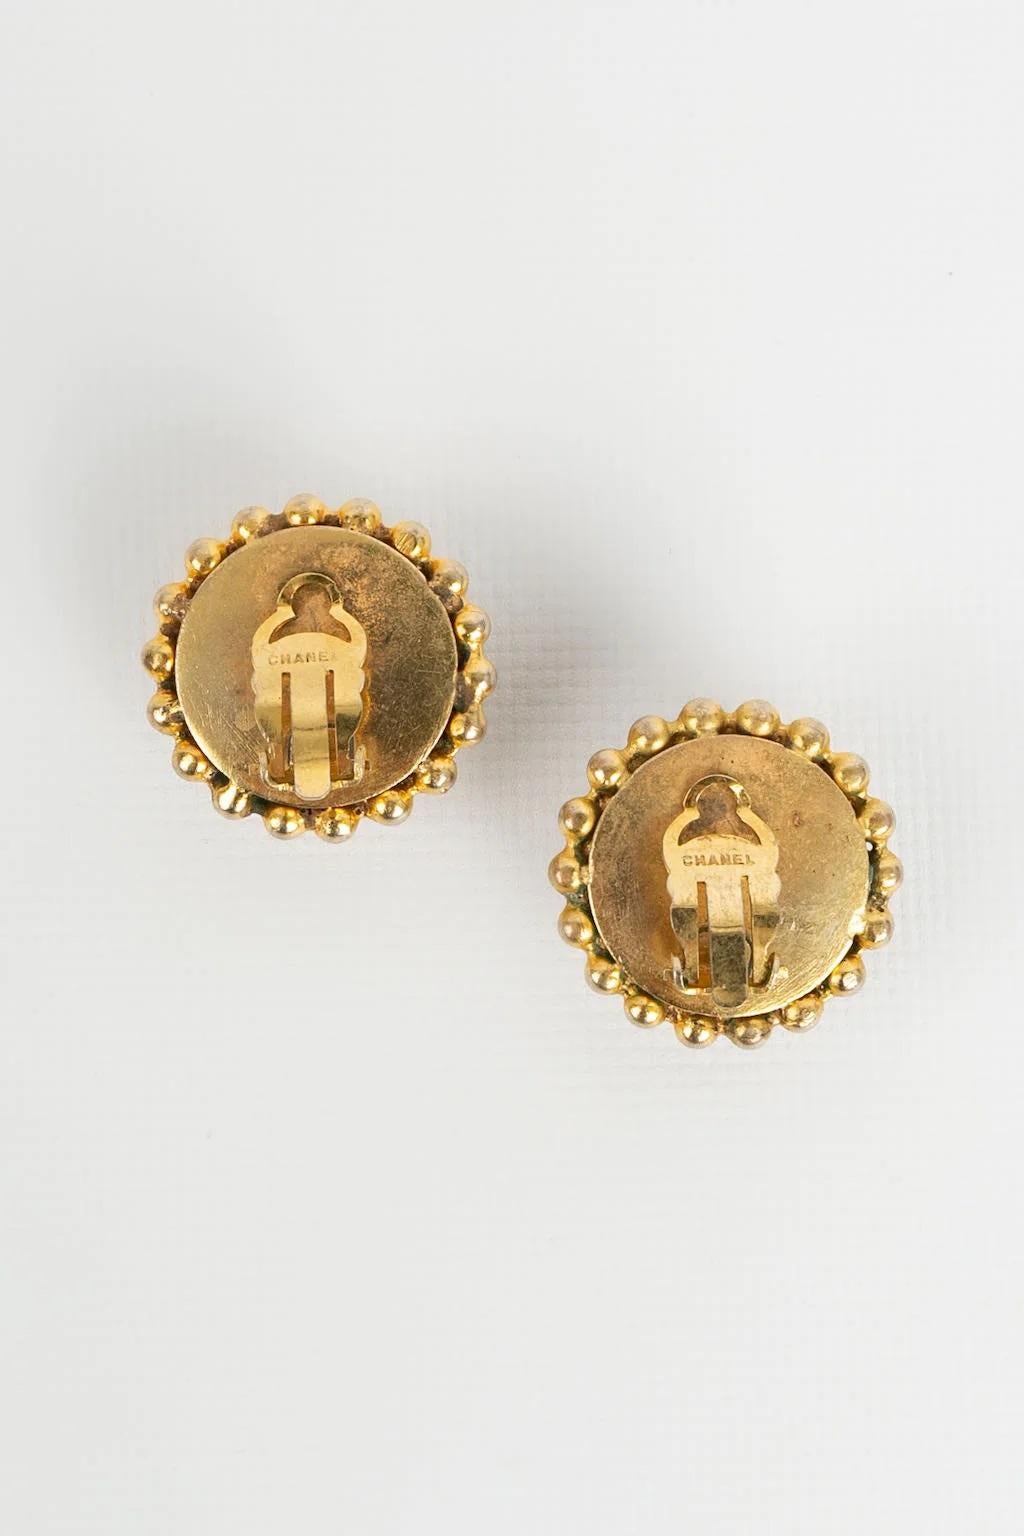 Artist Chanel  Metal Clip Earrings Centered with a Pearly Cabochon For Sale